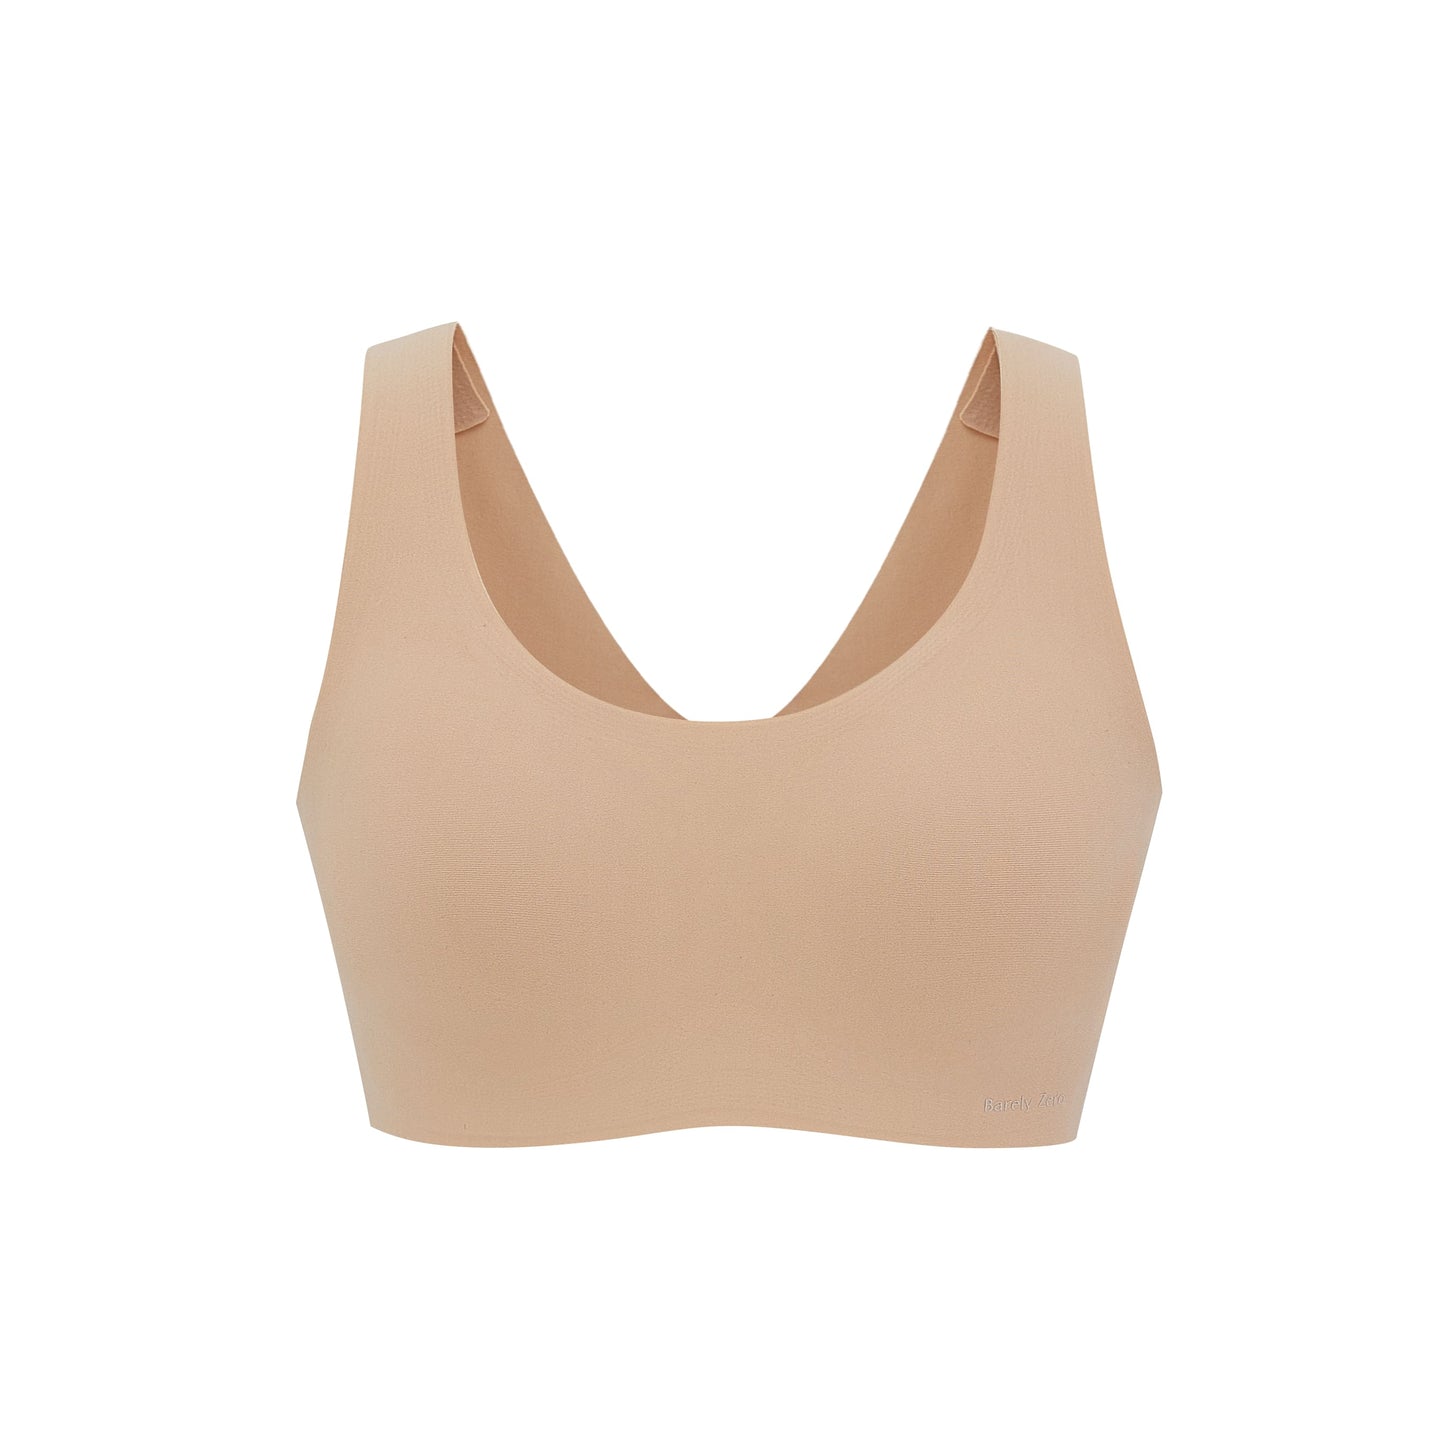 Flat lay image of nude colored bra with thick straps